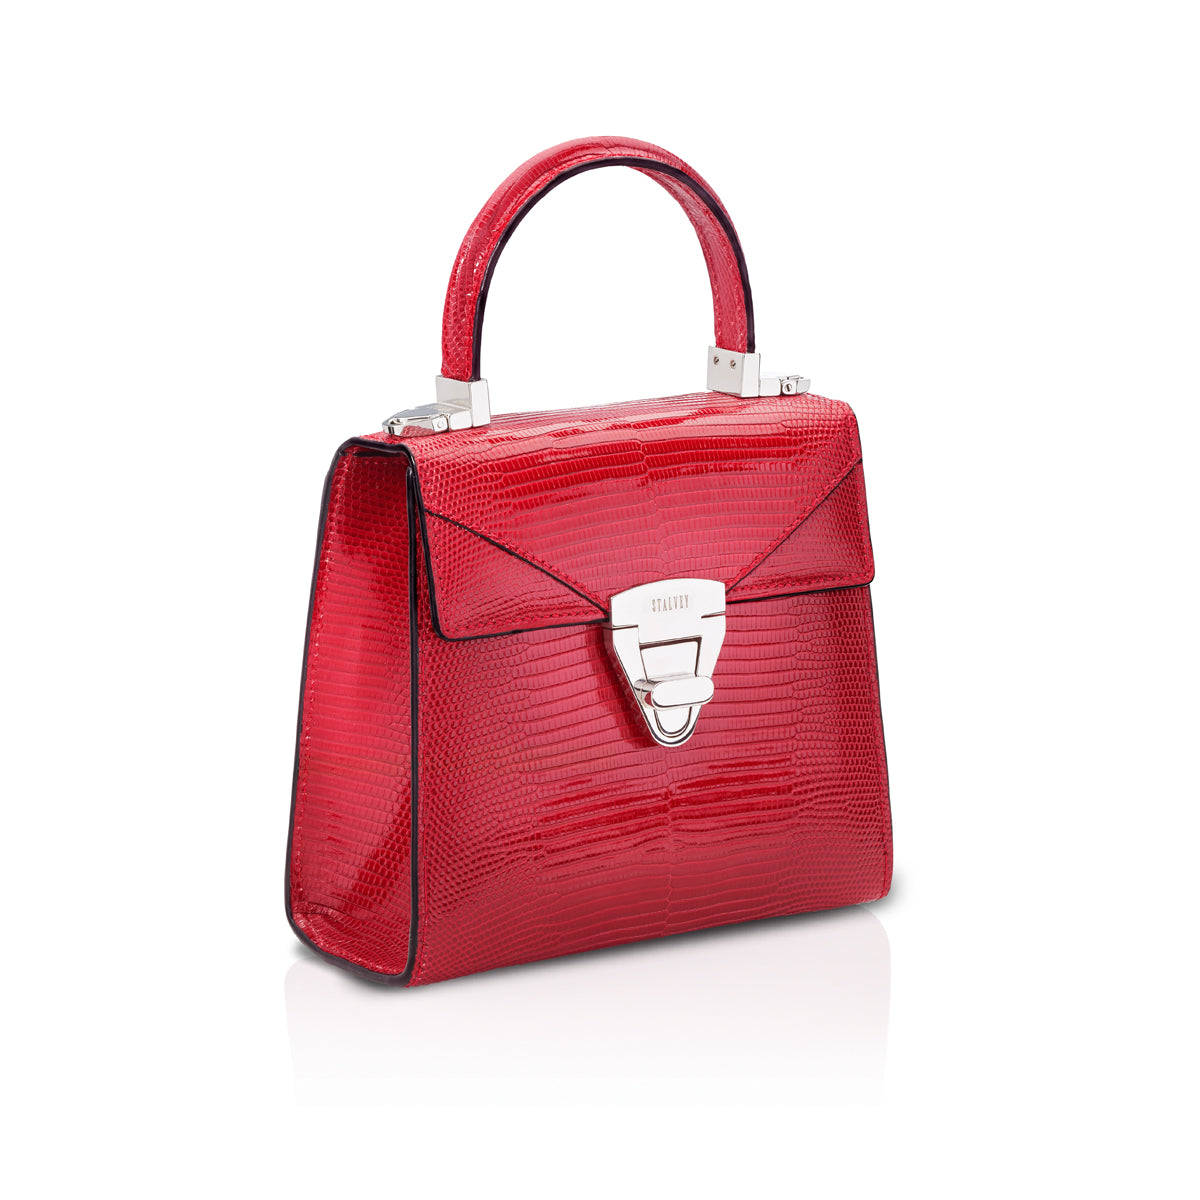 STALVEY Trapezoid 1.55 Mini in Red Lizard with Palladium Hardware Side View